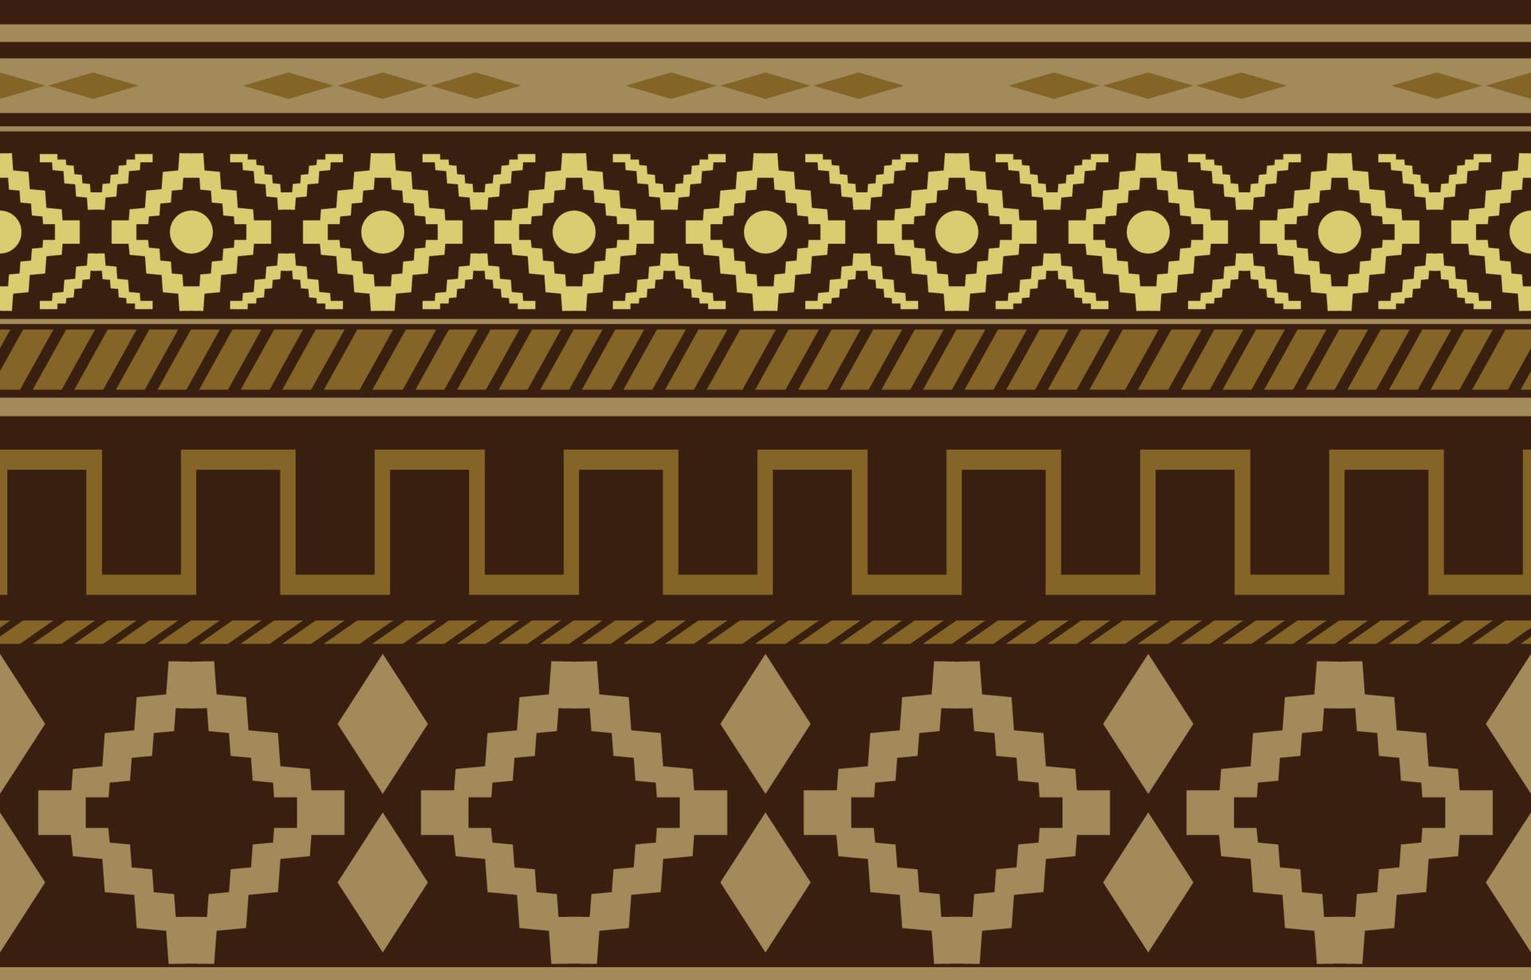 African geometric oriental tribal ethnic pattern. traditional background. Design for carpet,wallpaper,clothing,wrapping,batik,fabric,Vector illustration embroidery style. vector